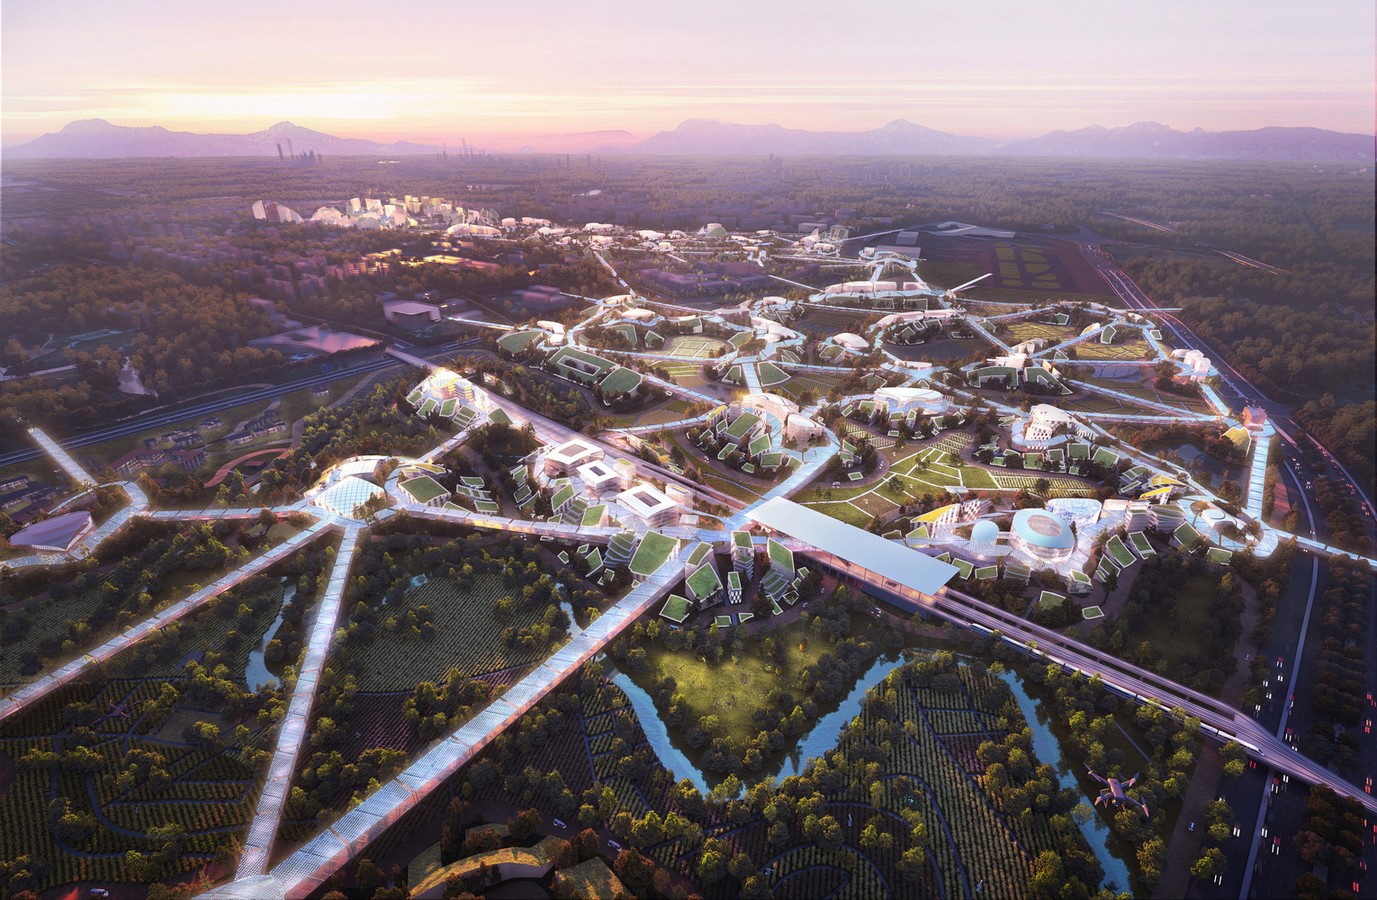 "Sky Valley", Chengdu Future Science and Technology City, in Southwest China unveiled by MVRDV - Sheet1